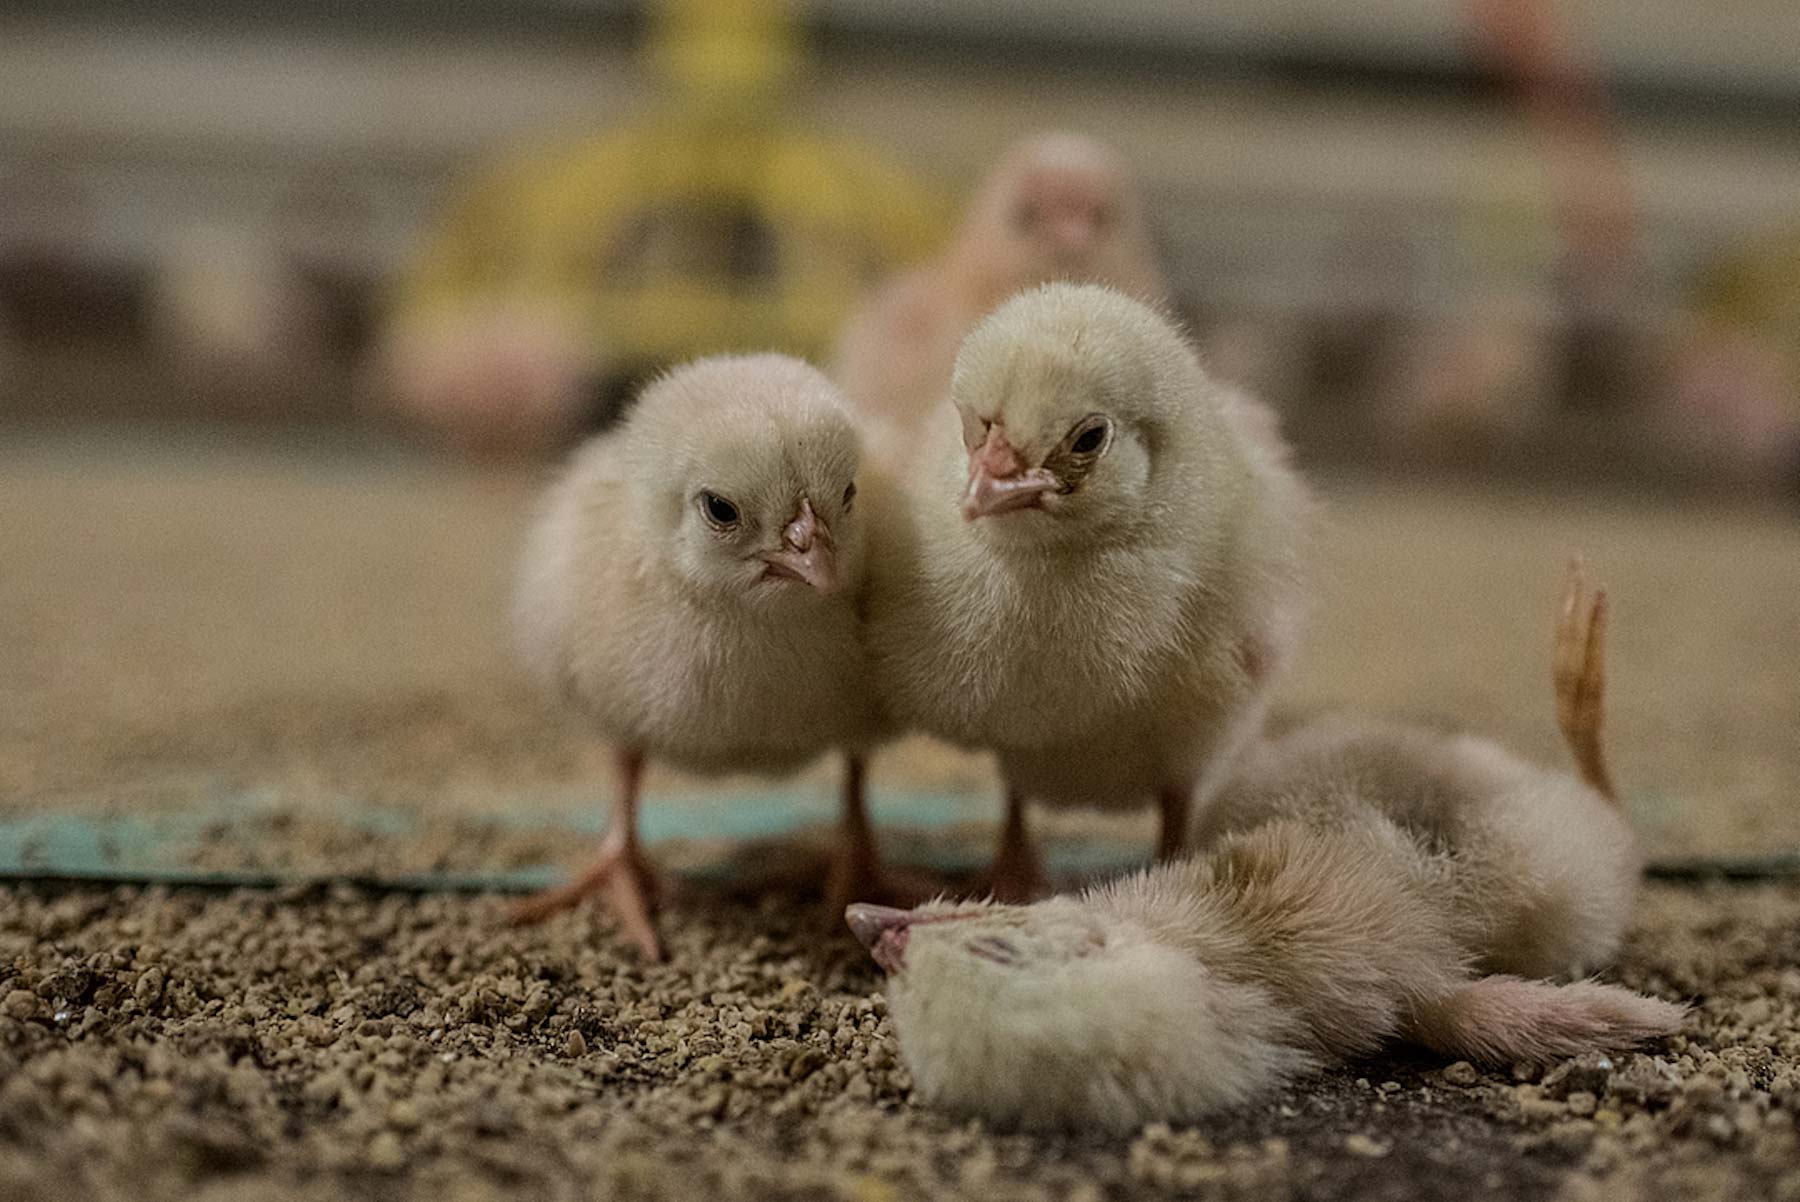 Chickens are factory farmed